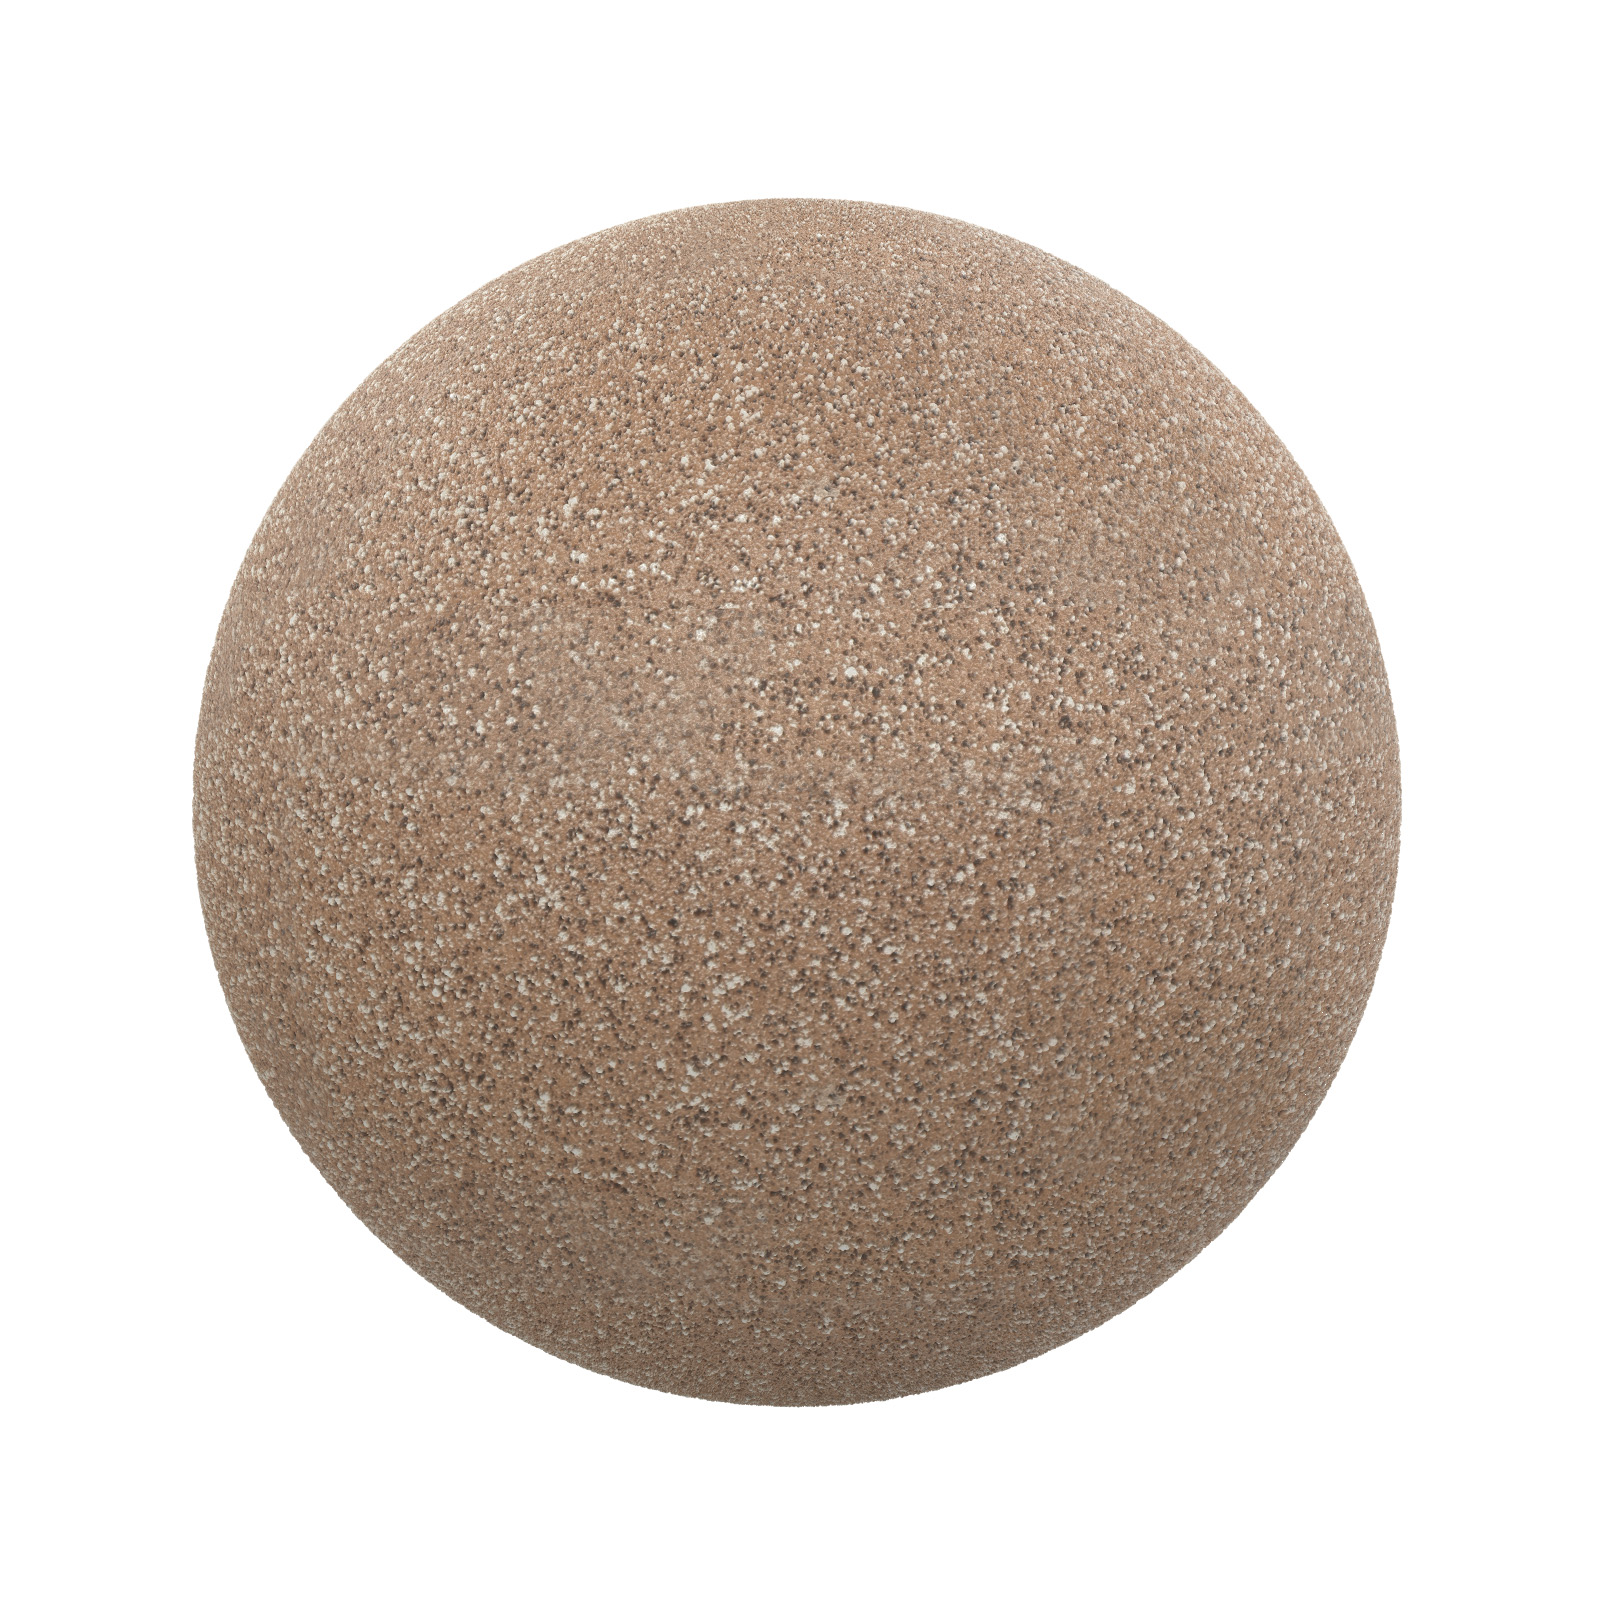 TEXTURES – STONES – CGAxis PBR Colection Vol 1 Stones – brown freckled stone - thumbnail 1